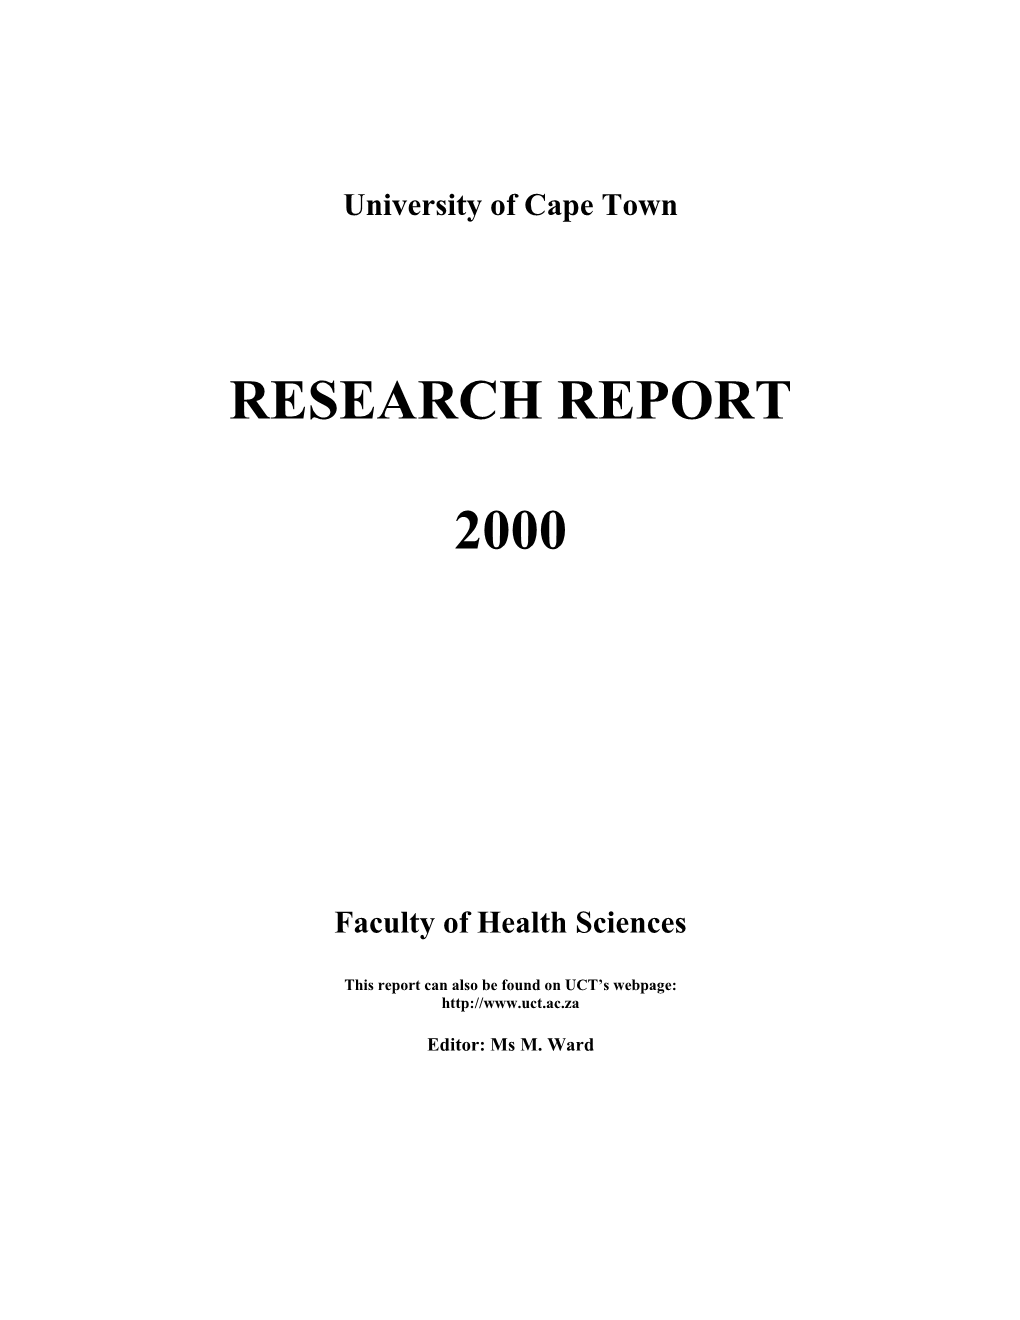 Research Report 2000